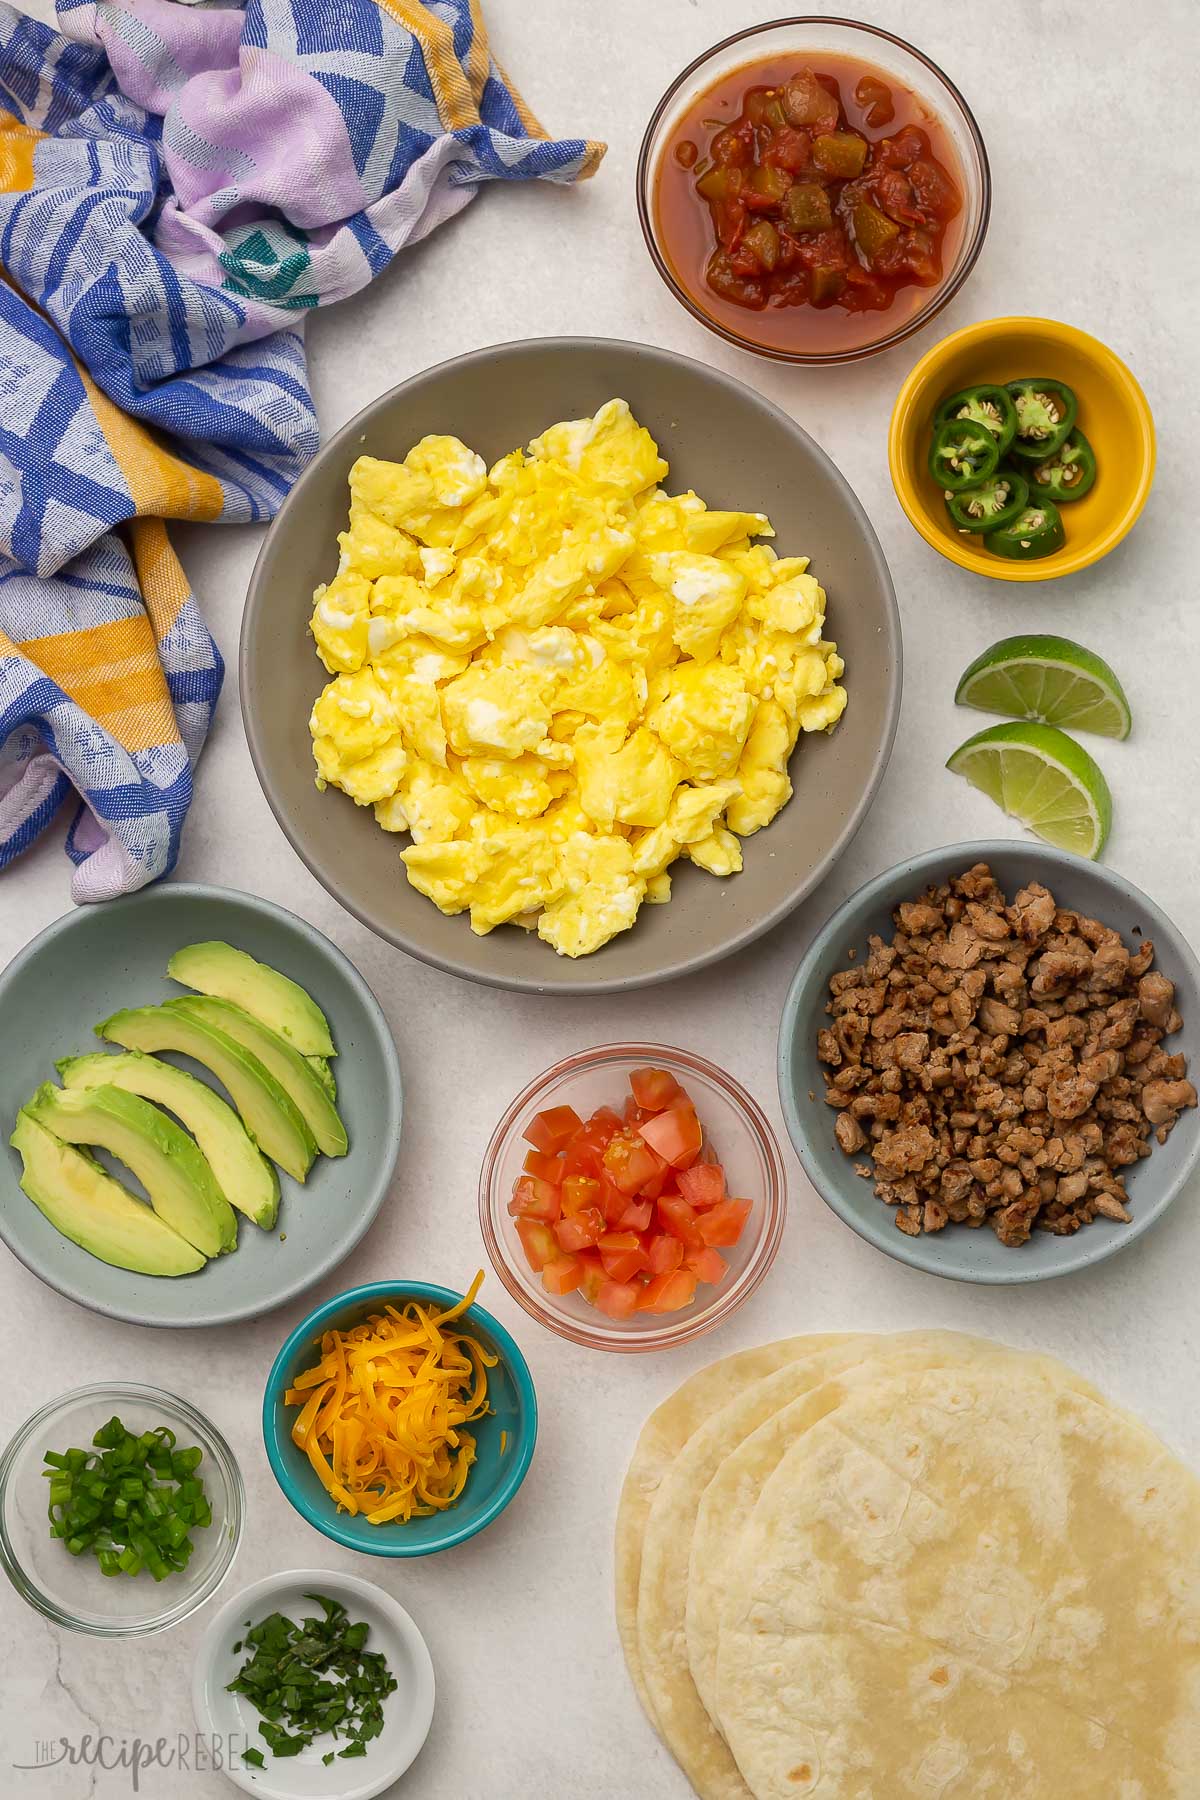 Top view of breakfast taco ingredients and toppings.